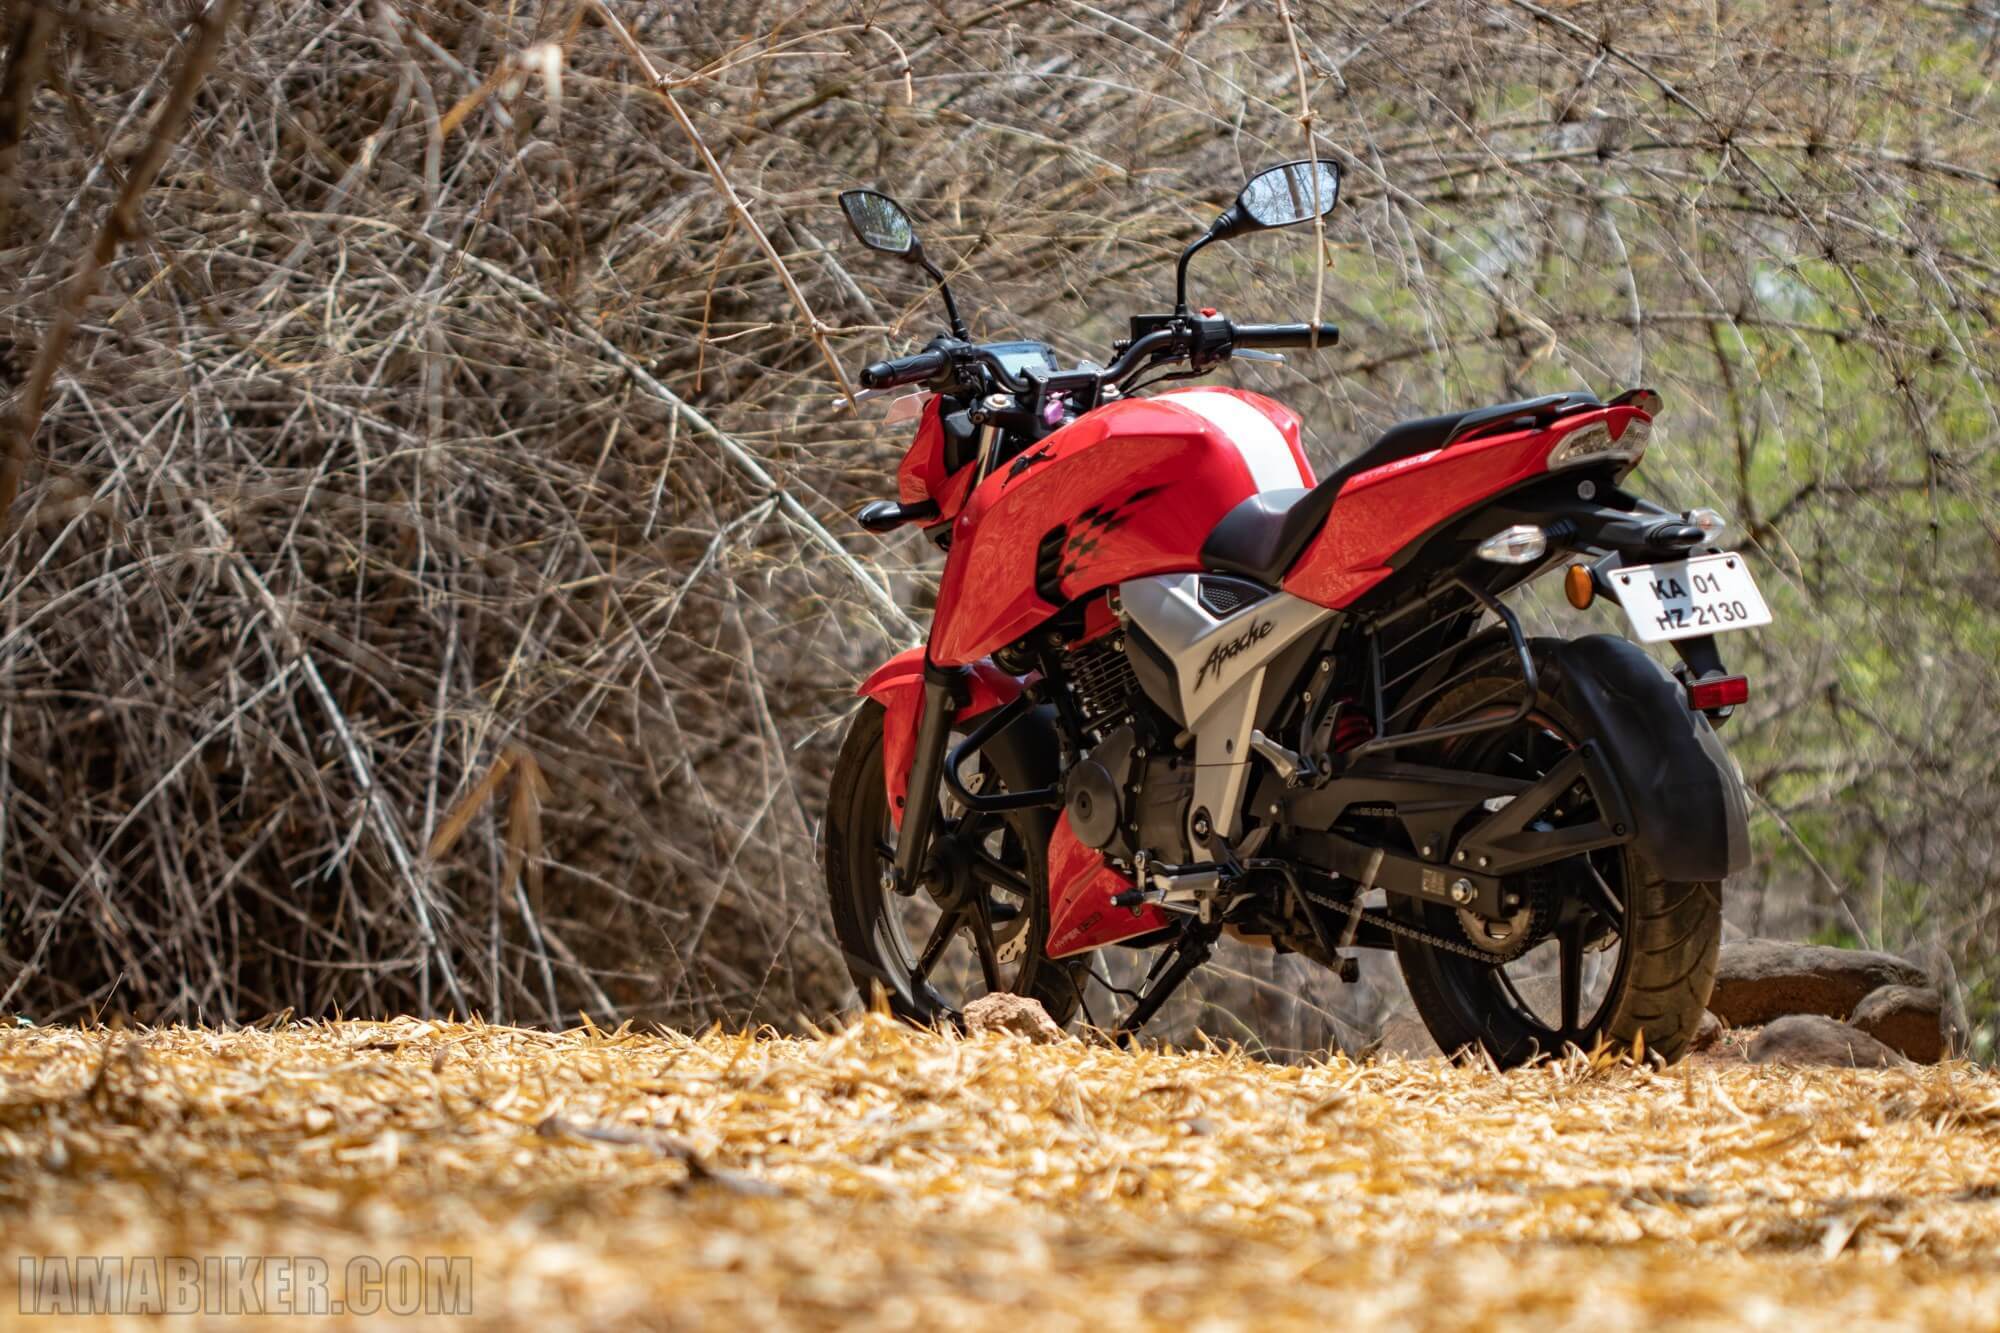 Apache Rtr 160 4v Wallpapers Wallpaper Cave